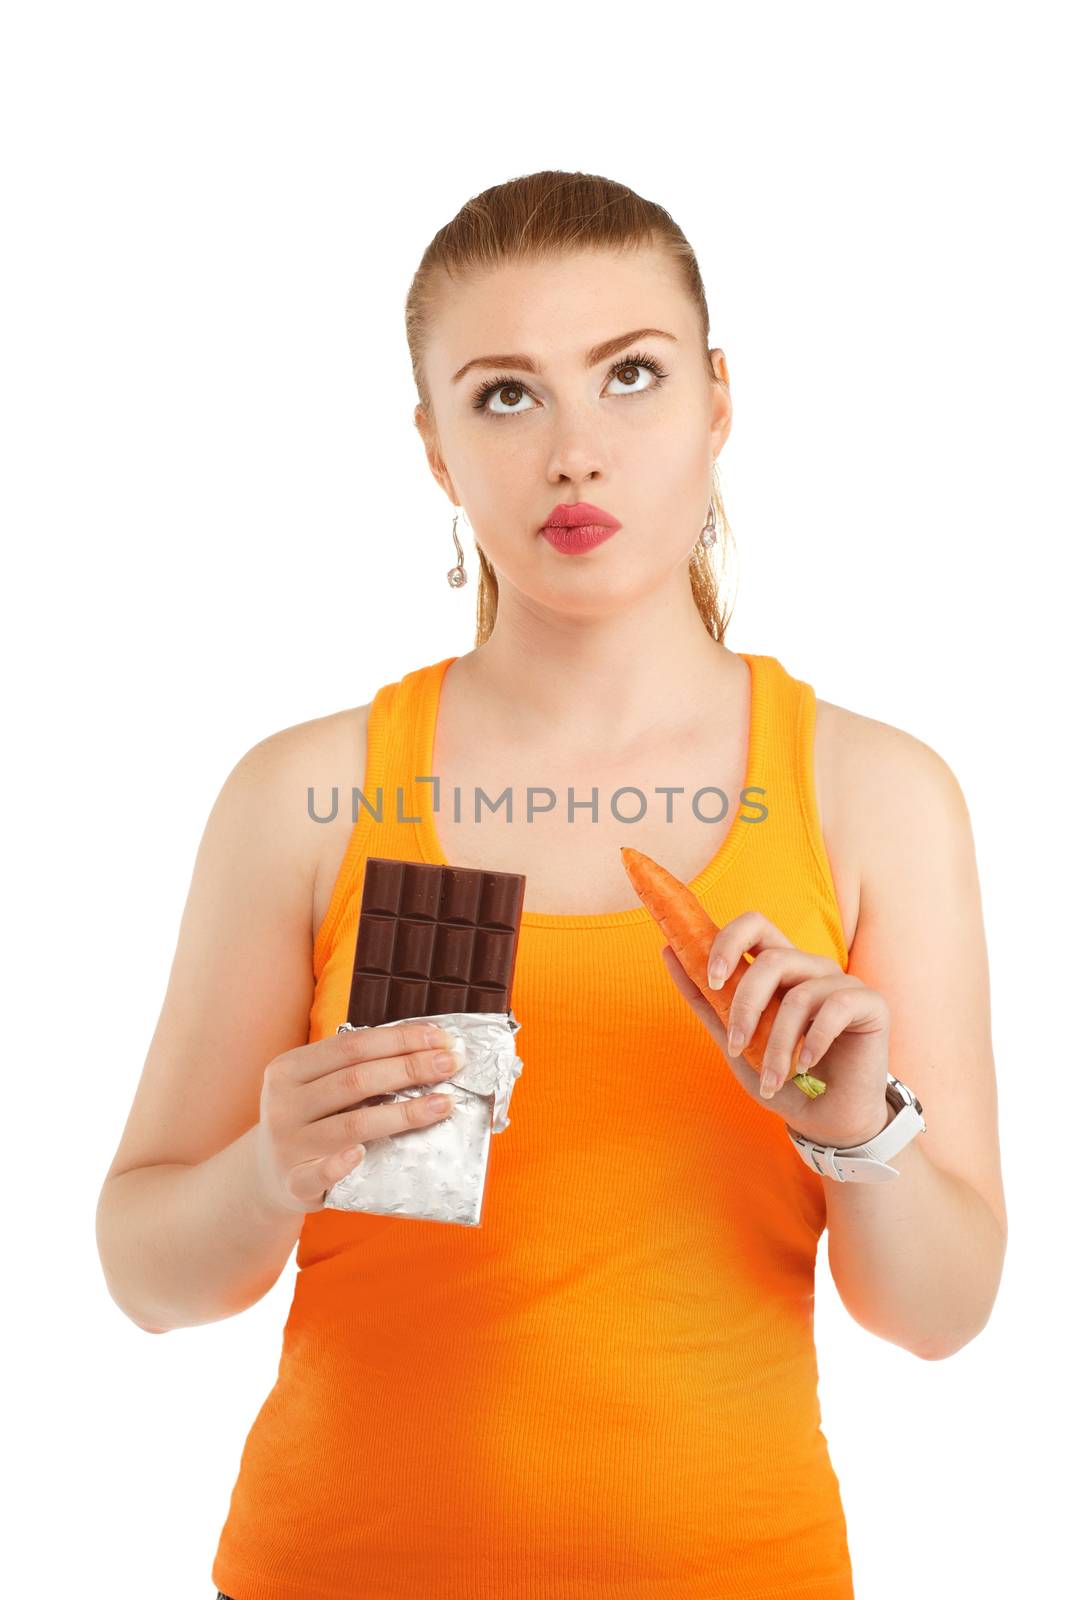 Portrait of a pretty girl having a dilemma with her diet. Concept of healthy nutrition.